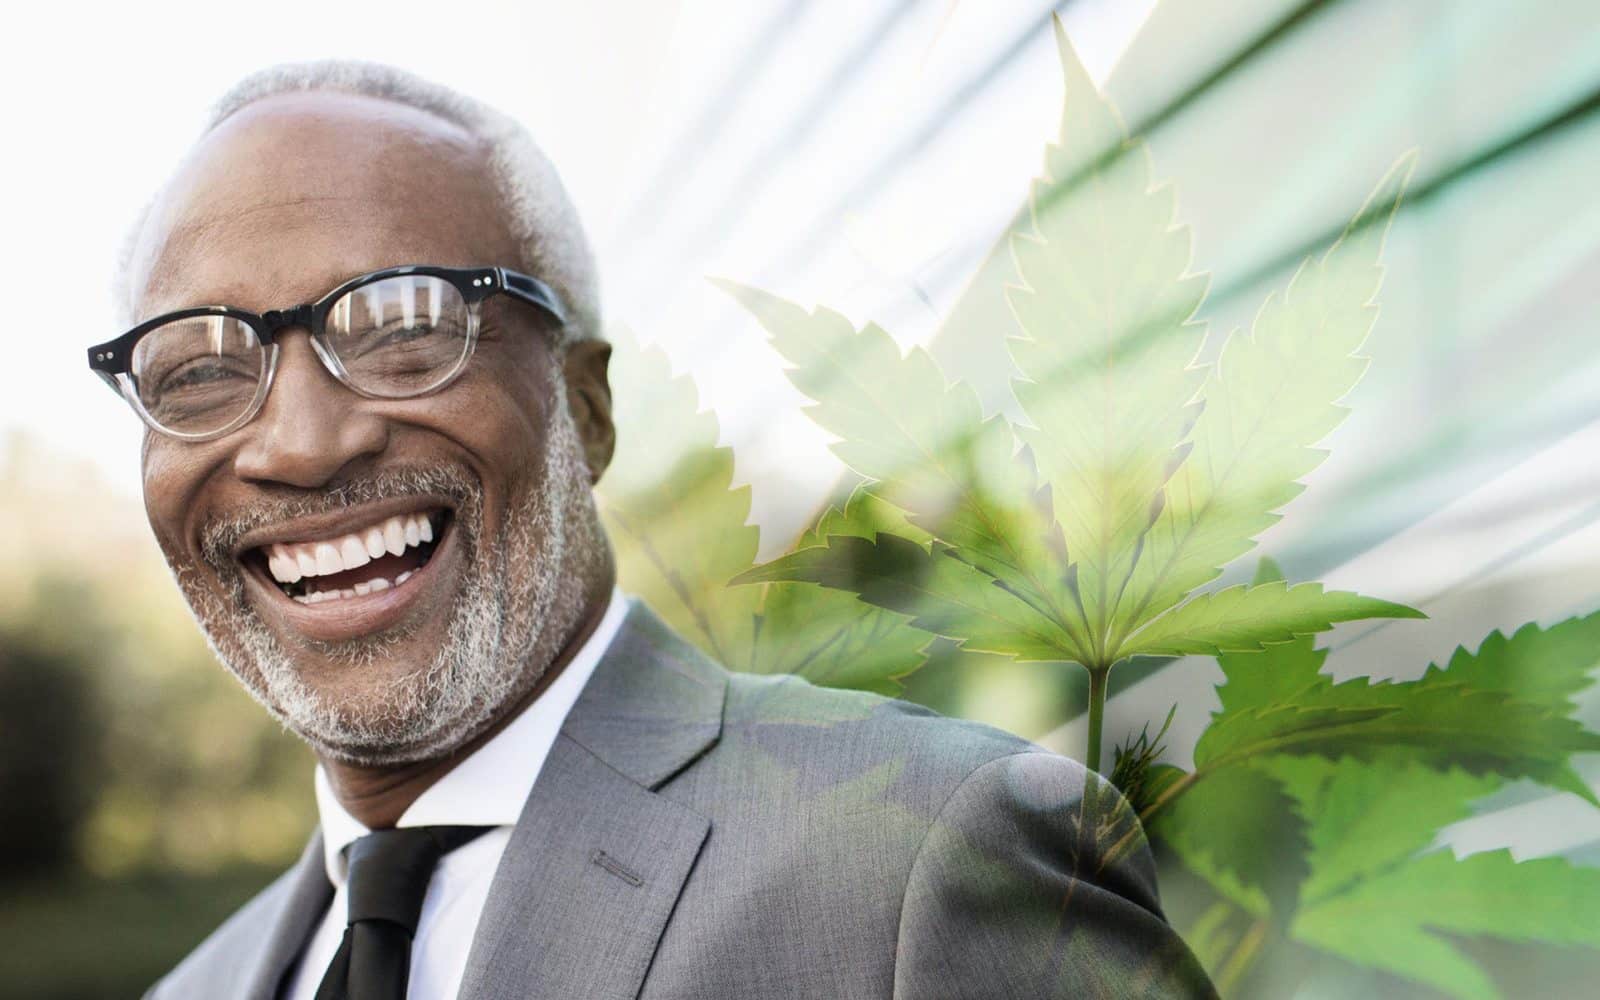 5 Ways Weed Makes You A Better Person